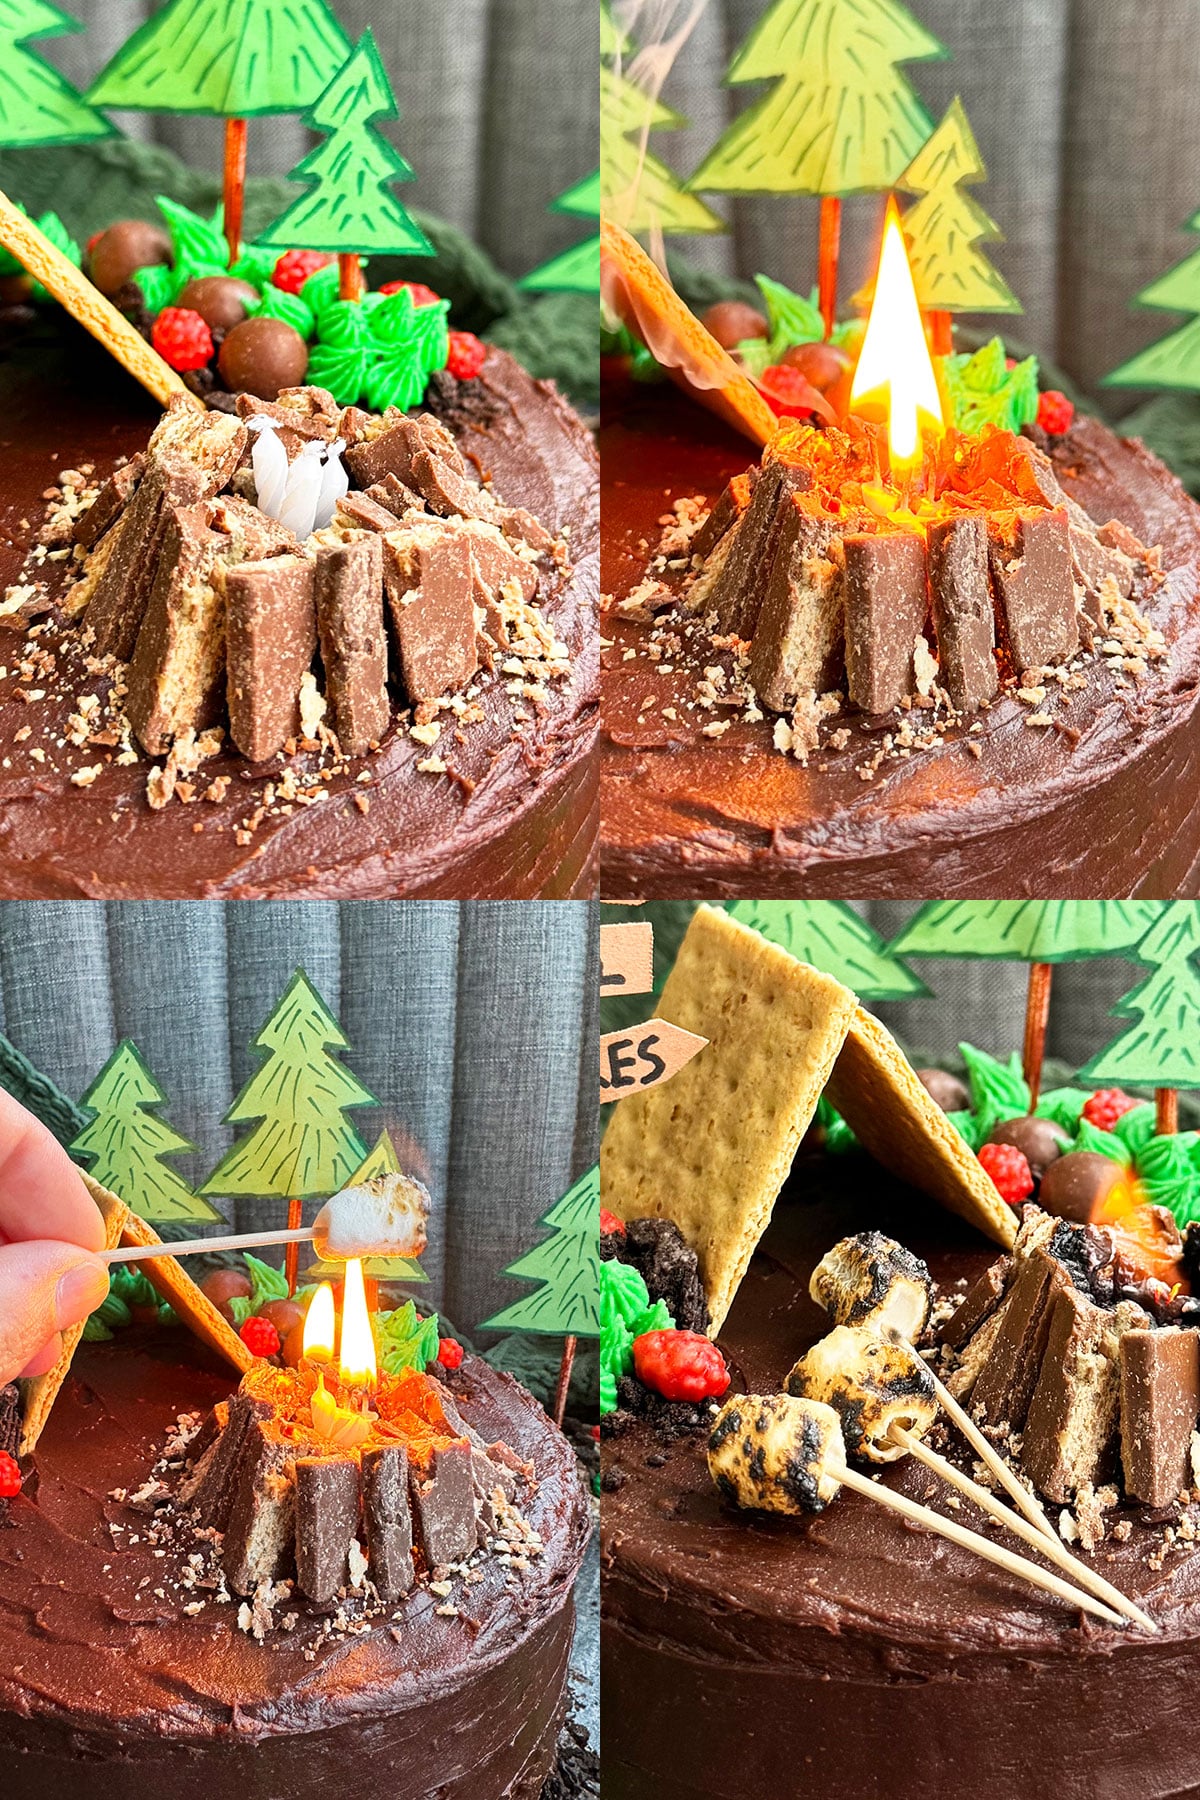 Collage Image With Campfire Cake Details.